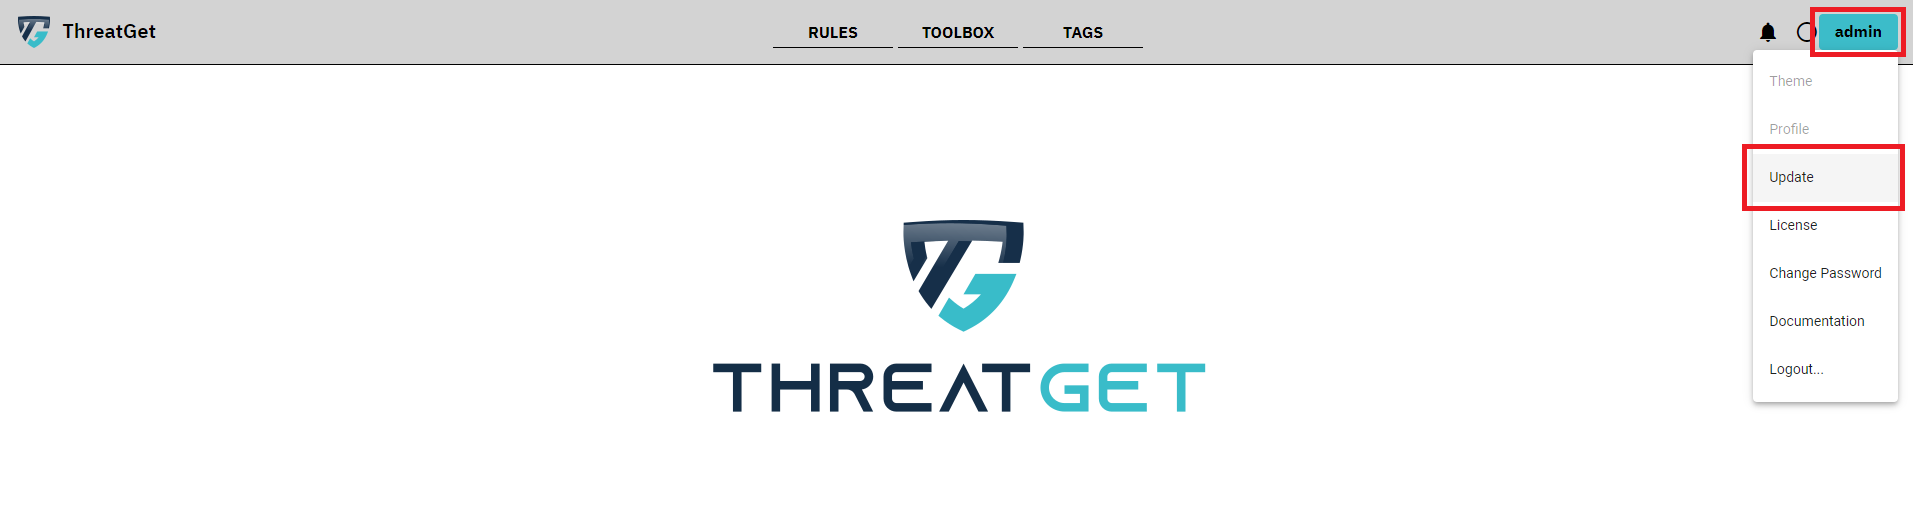 ThreatGet overview screen with marked update button